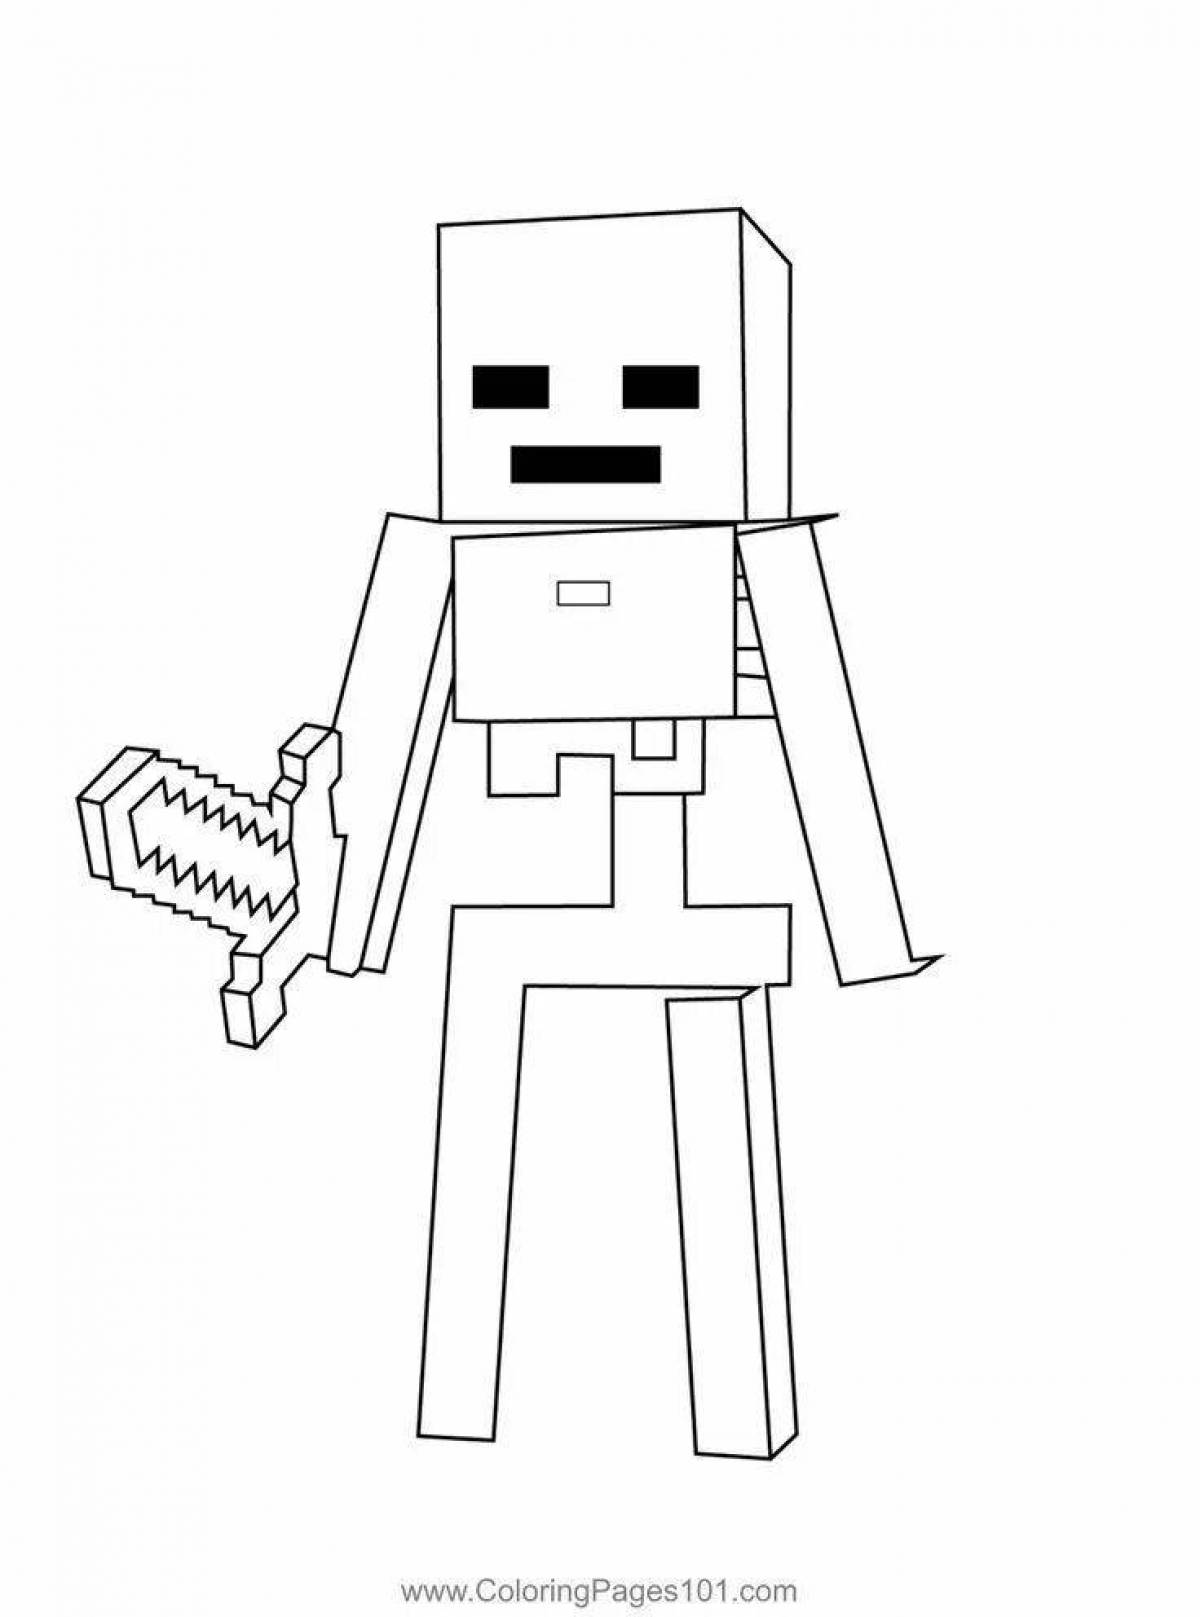 Awesome vizer minecraft coloring page